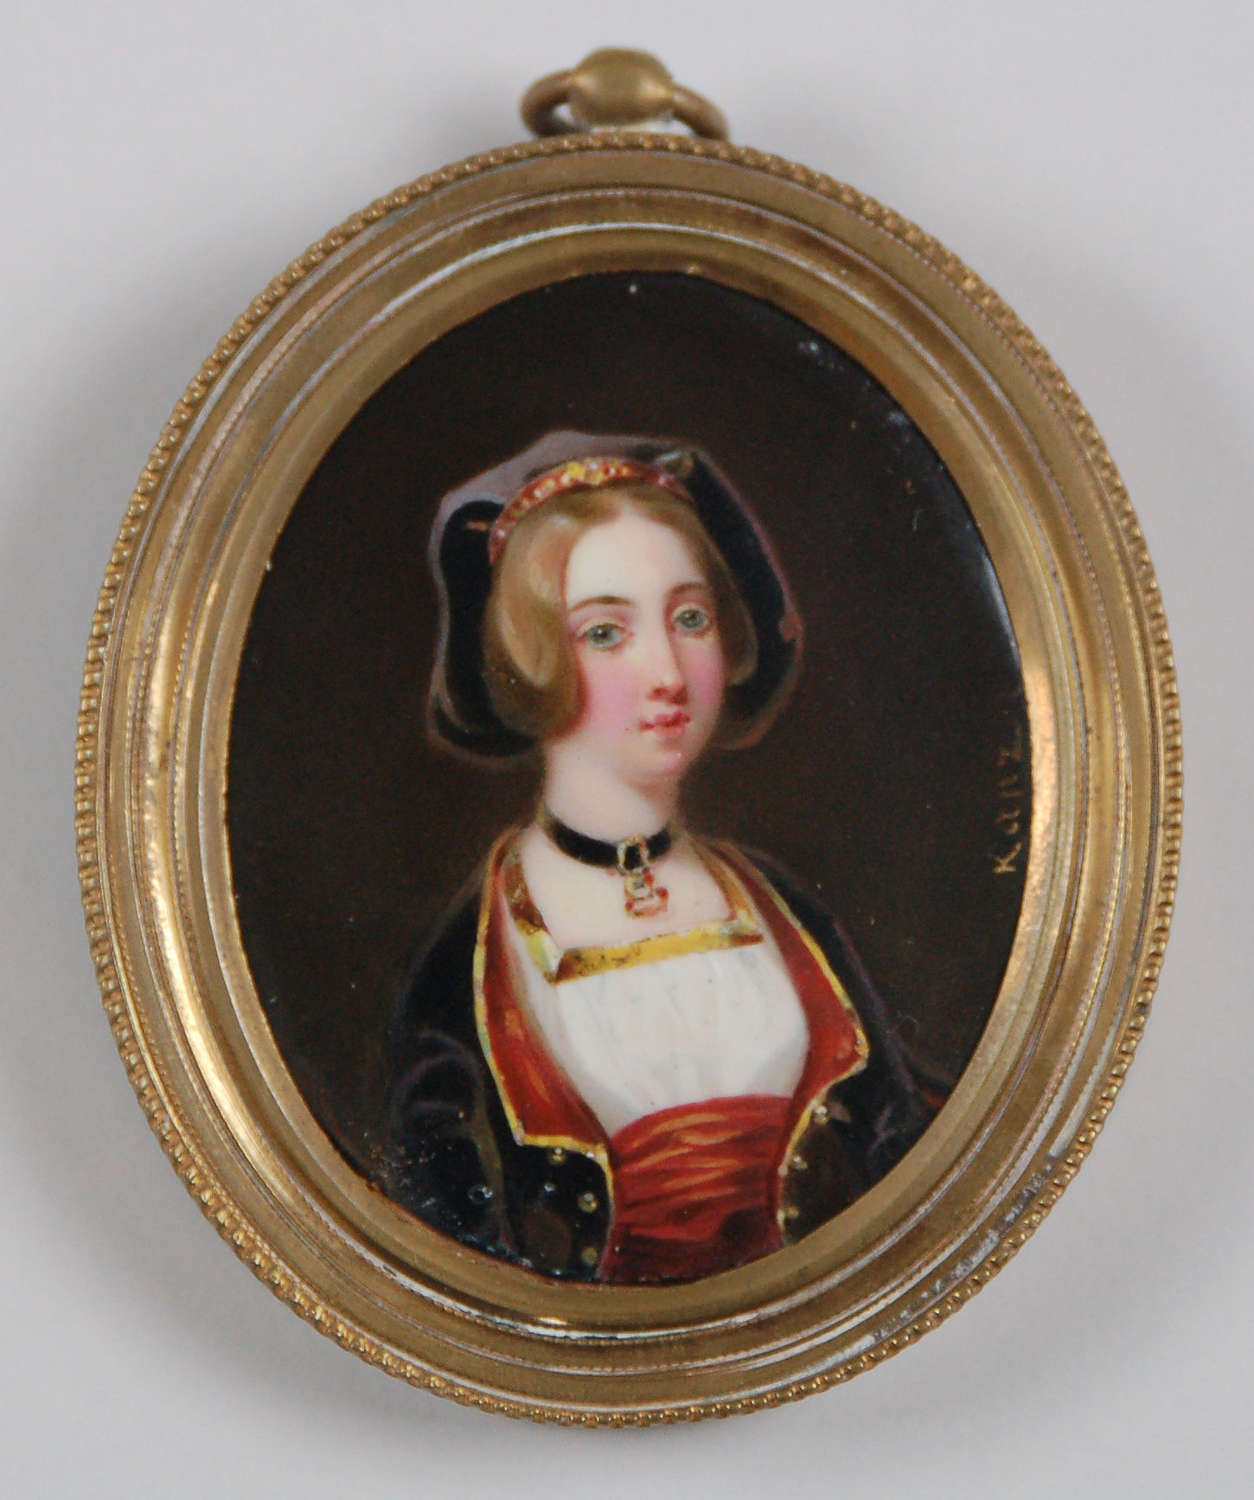 Miniature of a lady on enamel signed Kanz C1790